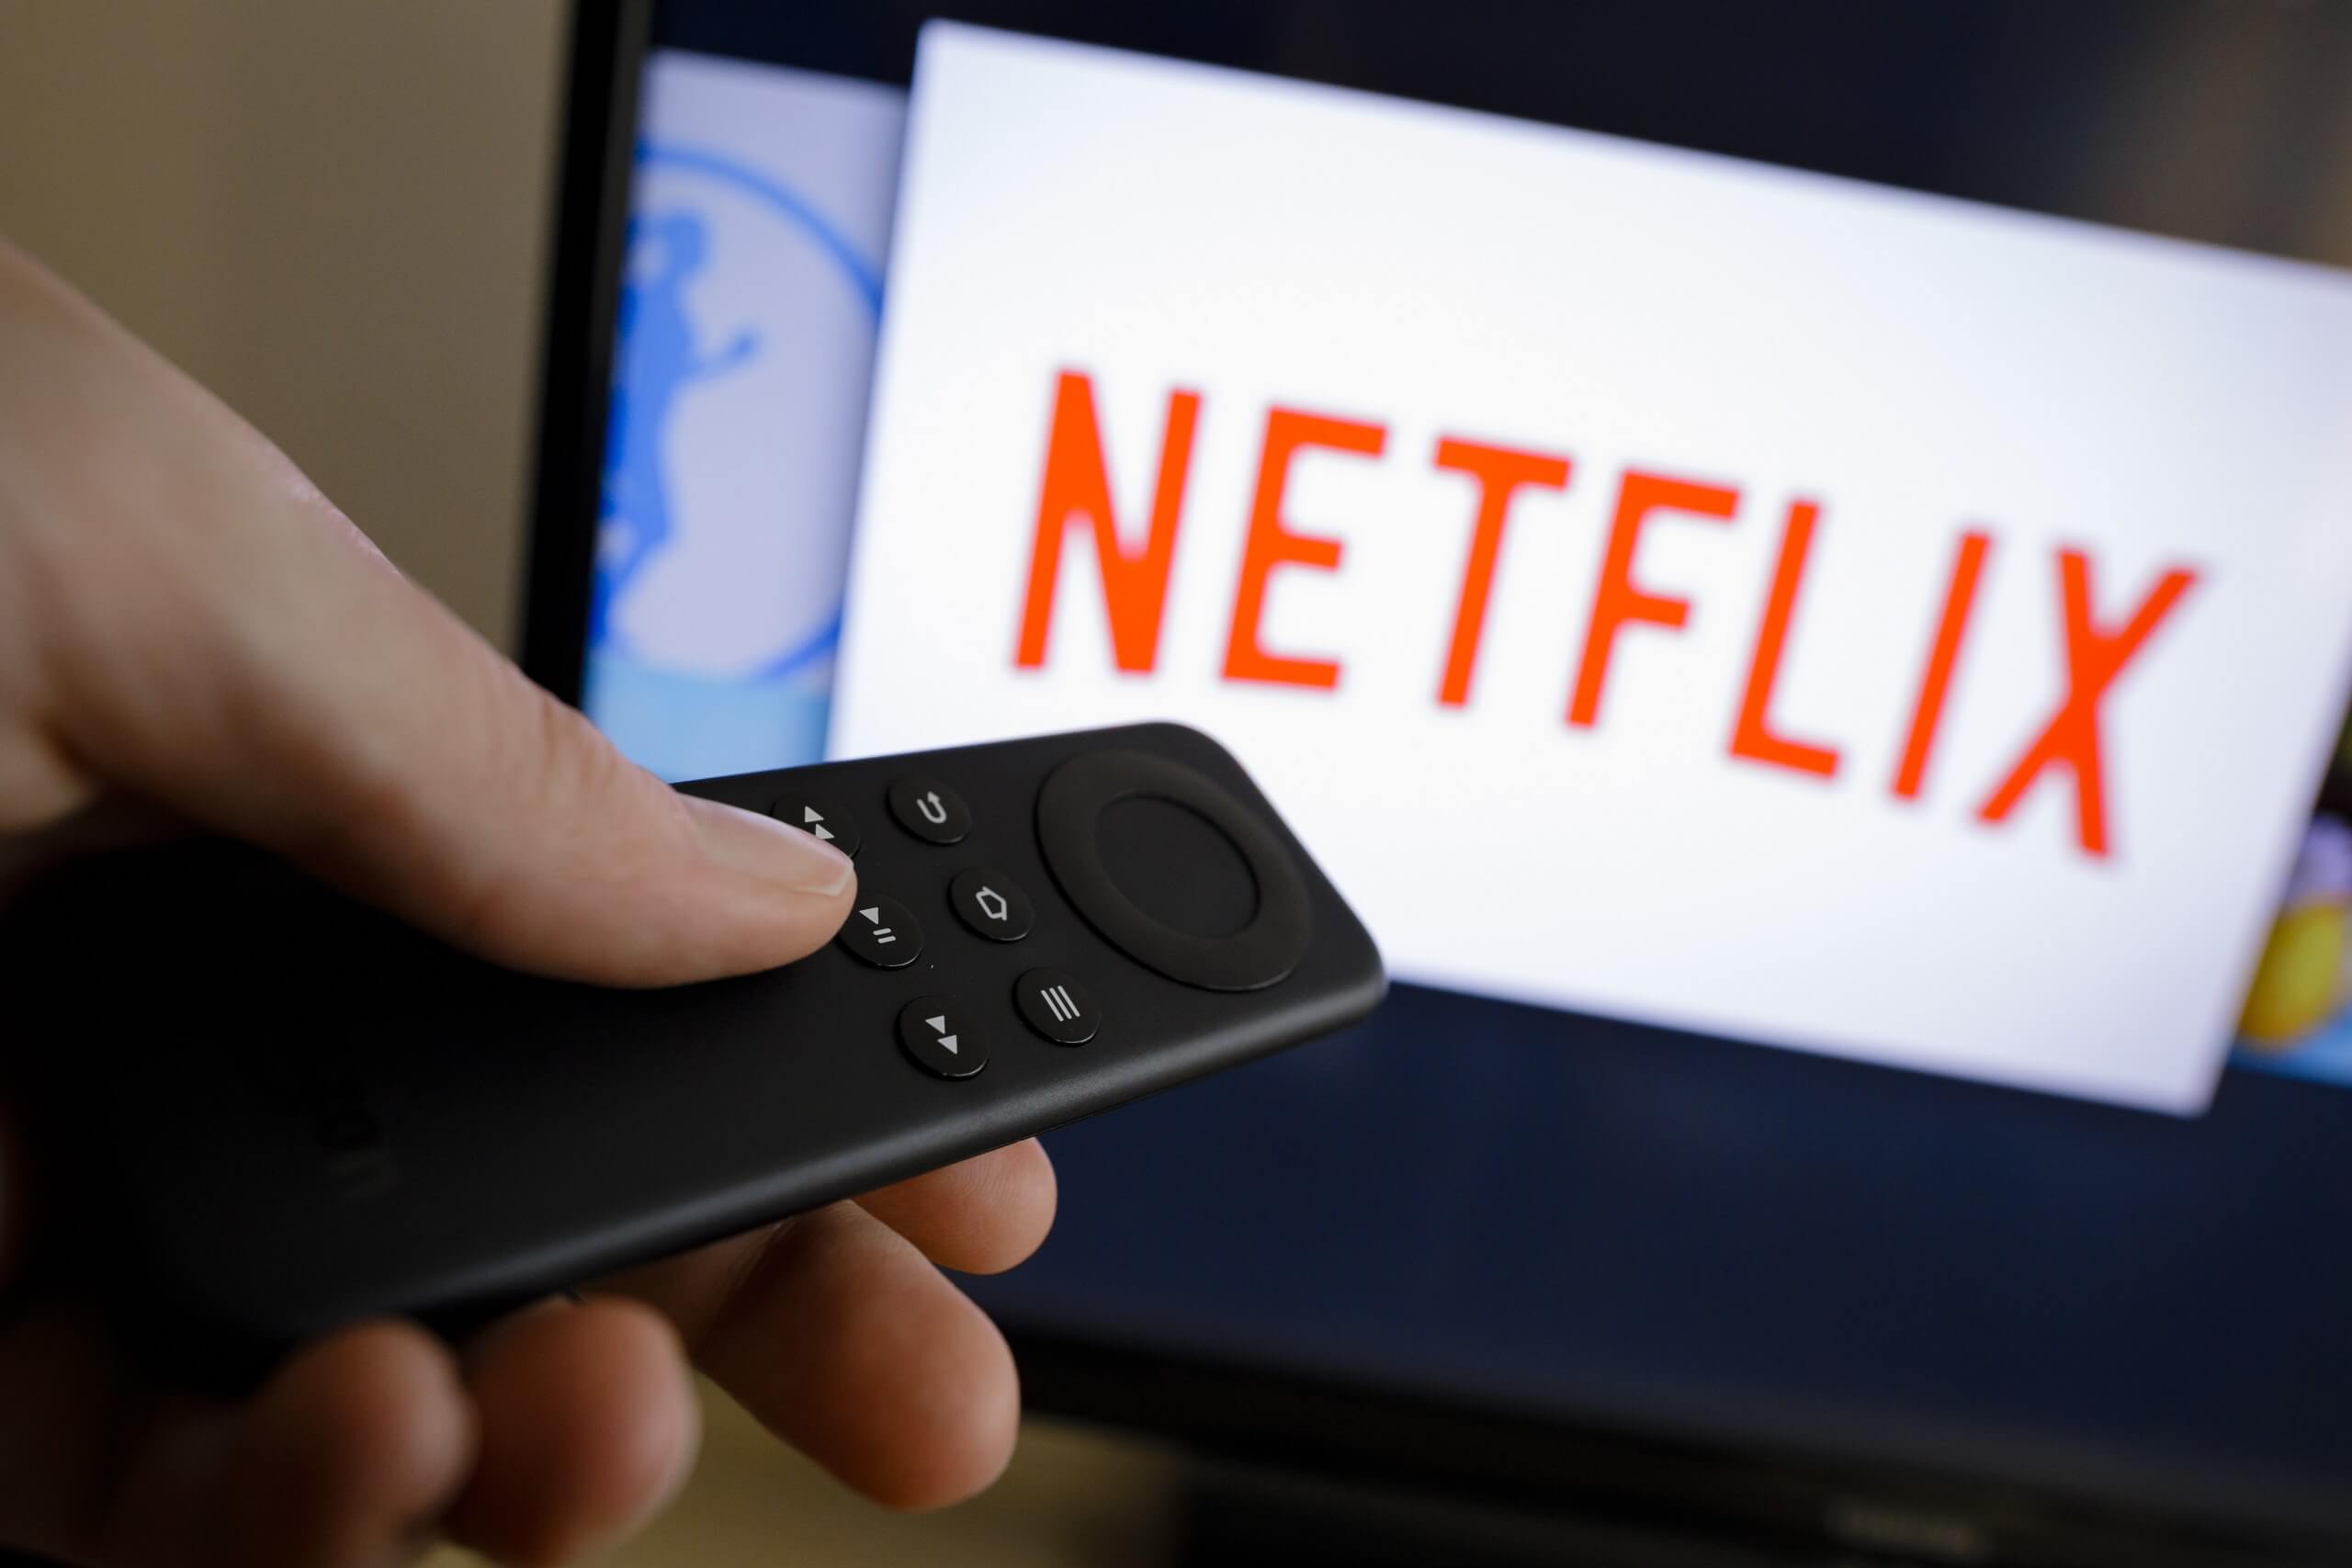 New study shows over half of Netflix customers would cancel if it had ads